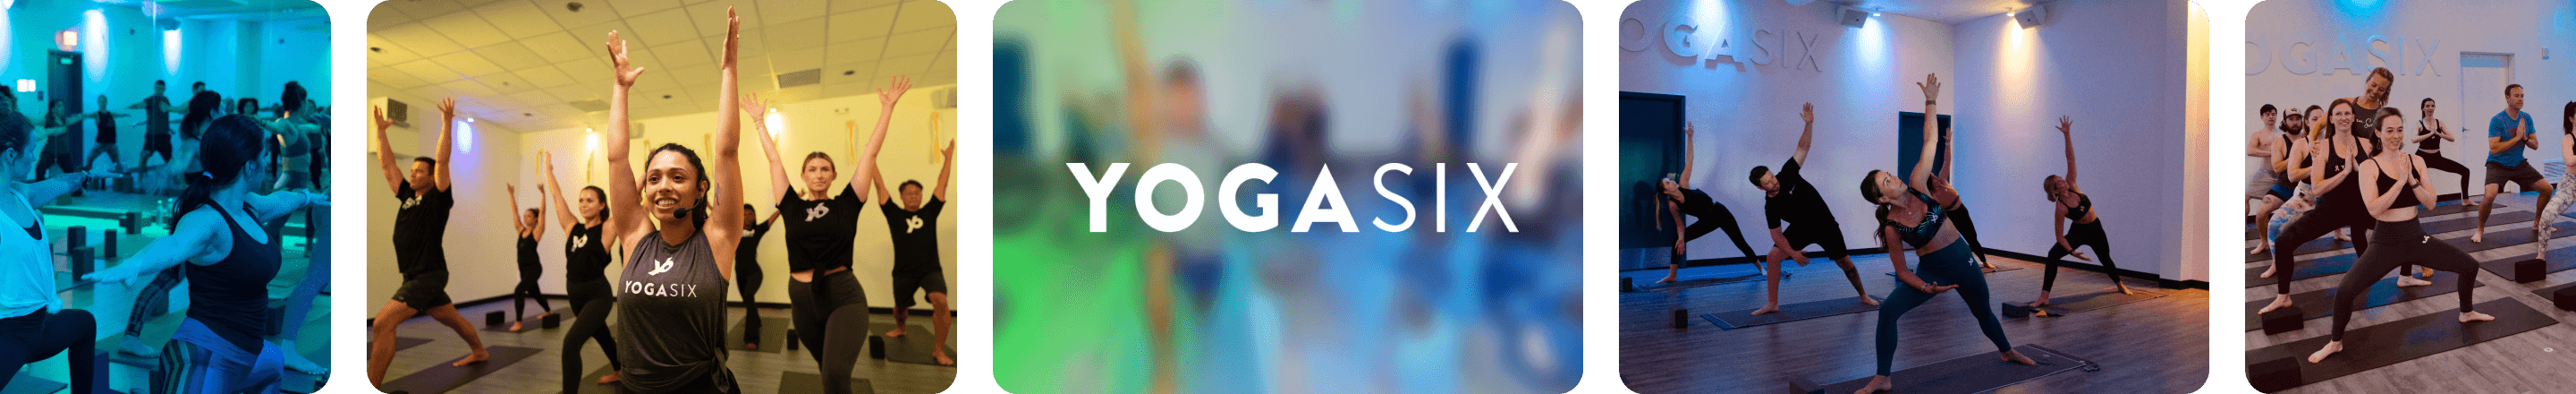 yogasix-collage